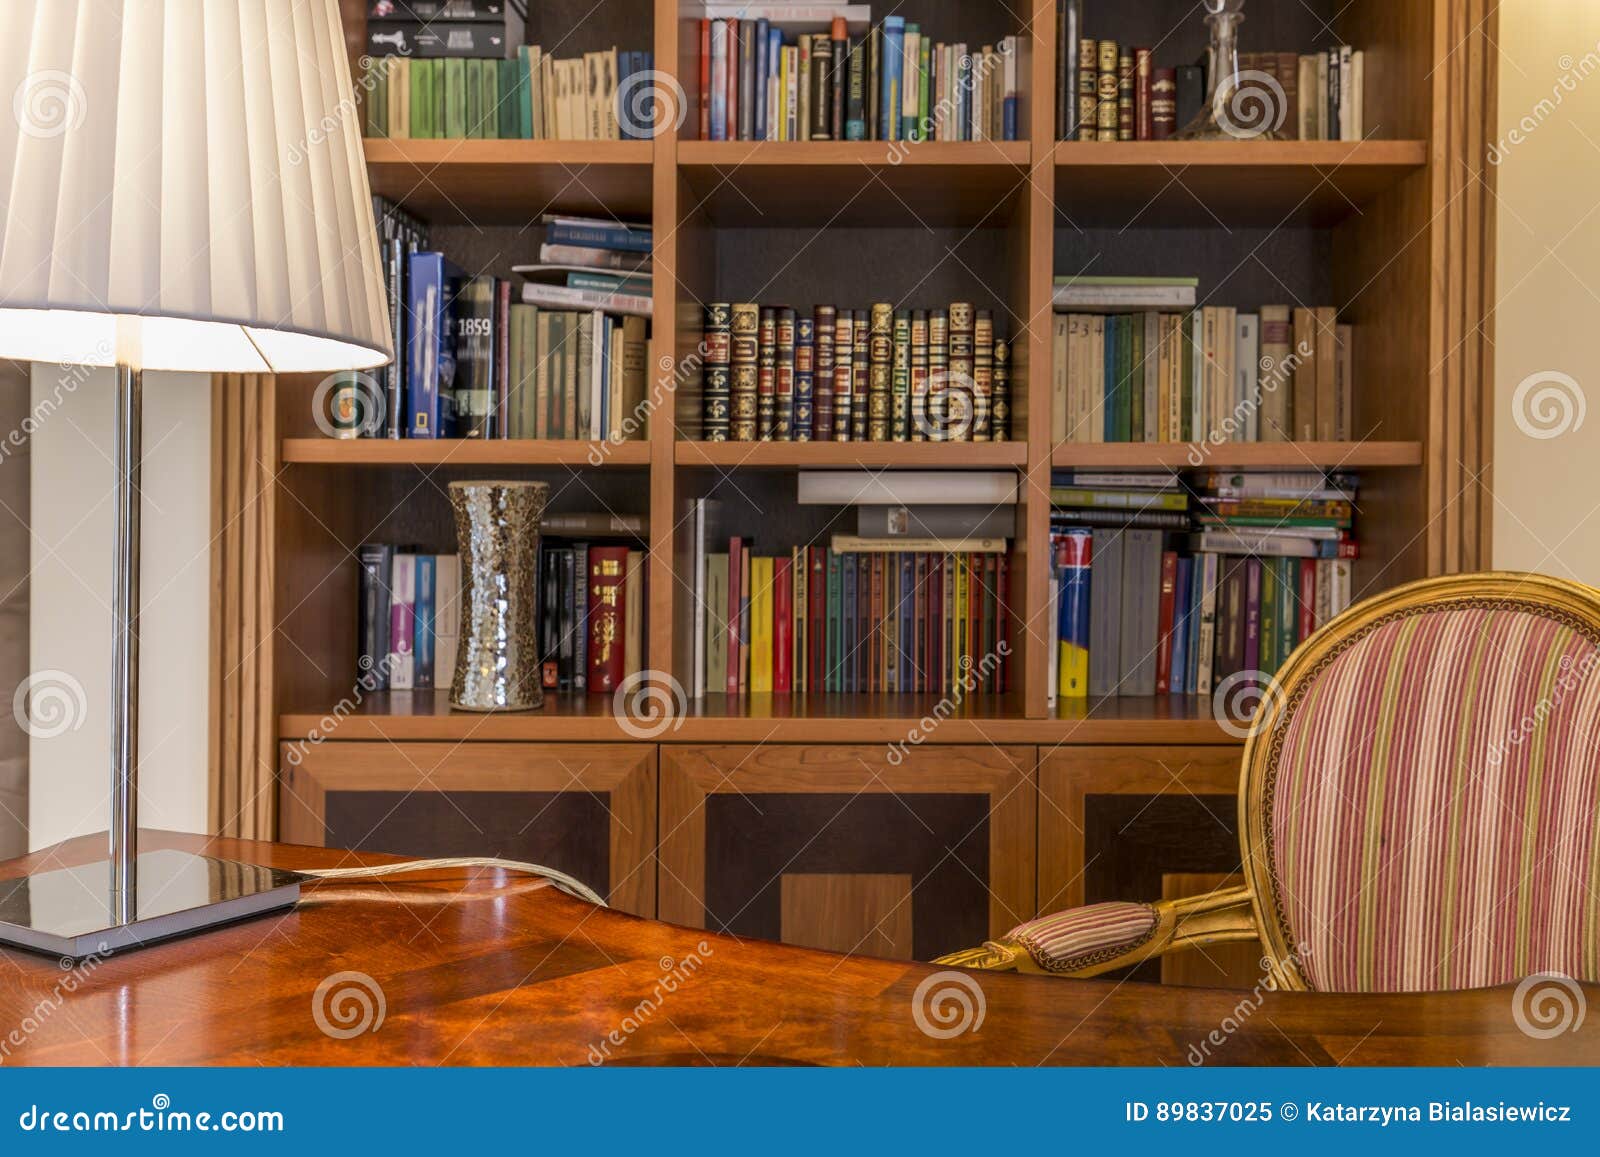 wooden desk and classic bookcase with books